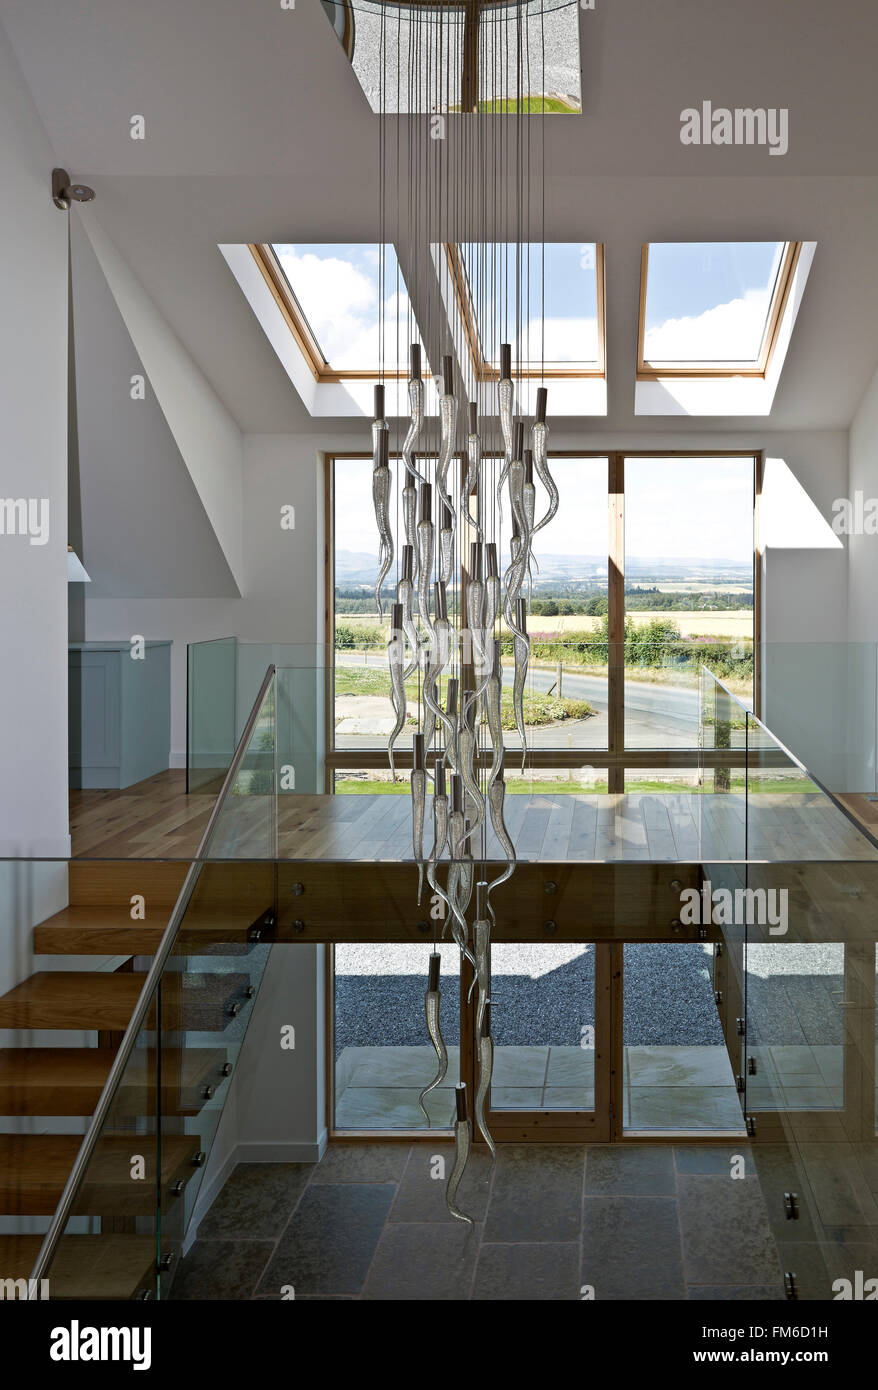 An interior view of a modern residential property called the Amor House, in Gleneagles, showing a part of the staircase and the large windows. Stock Photo